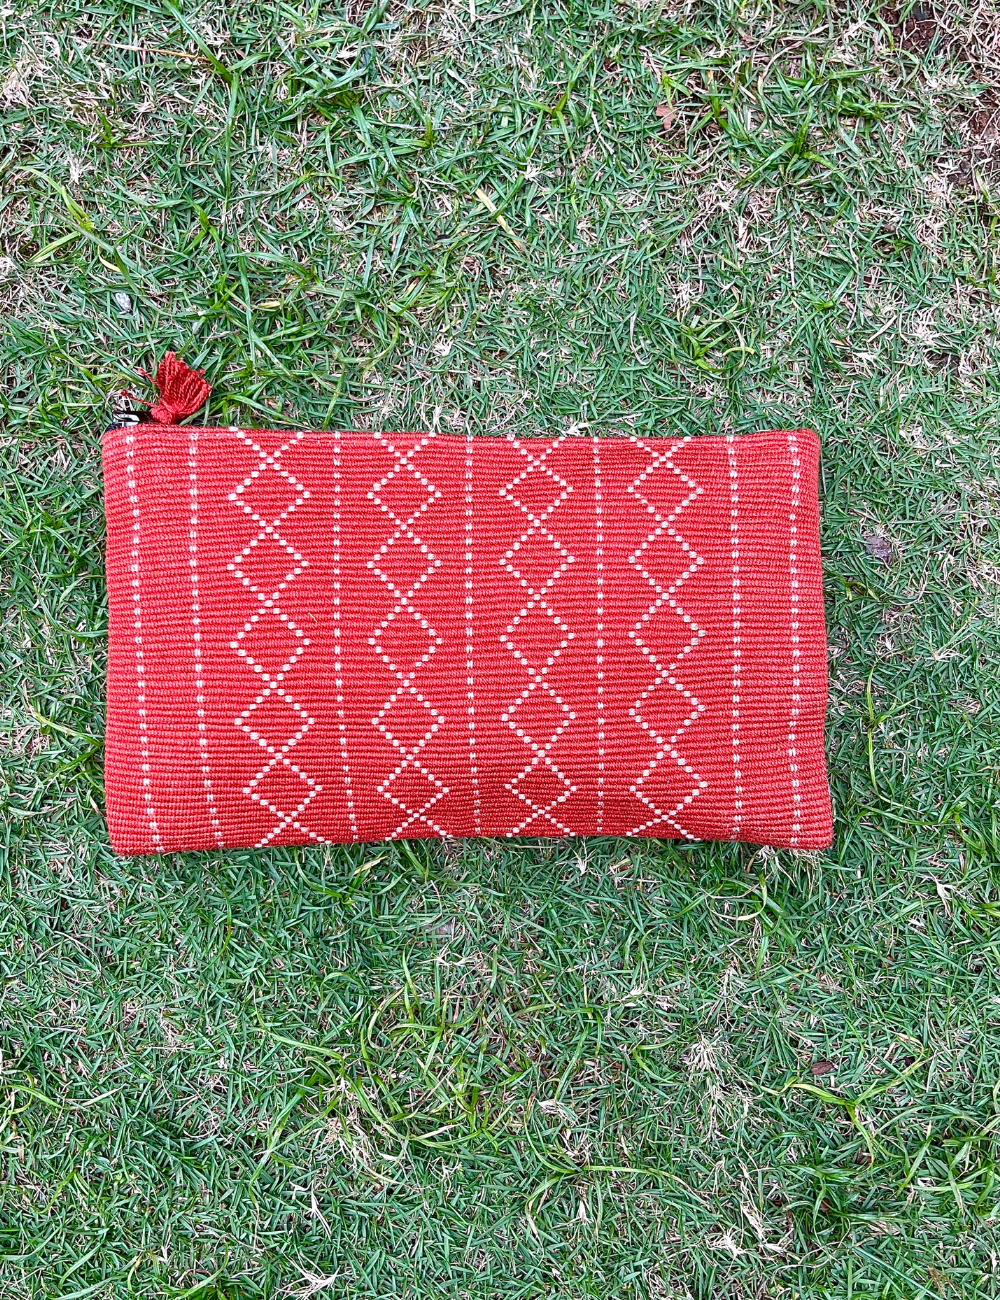 Chizami Weaves - Handwoven Utility Pouch